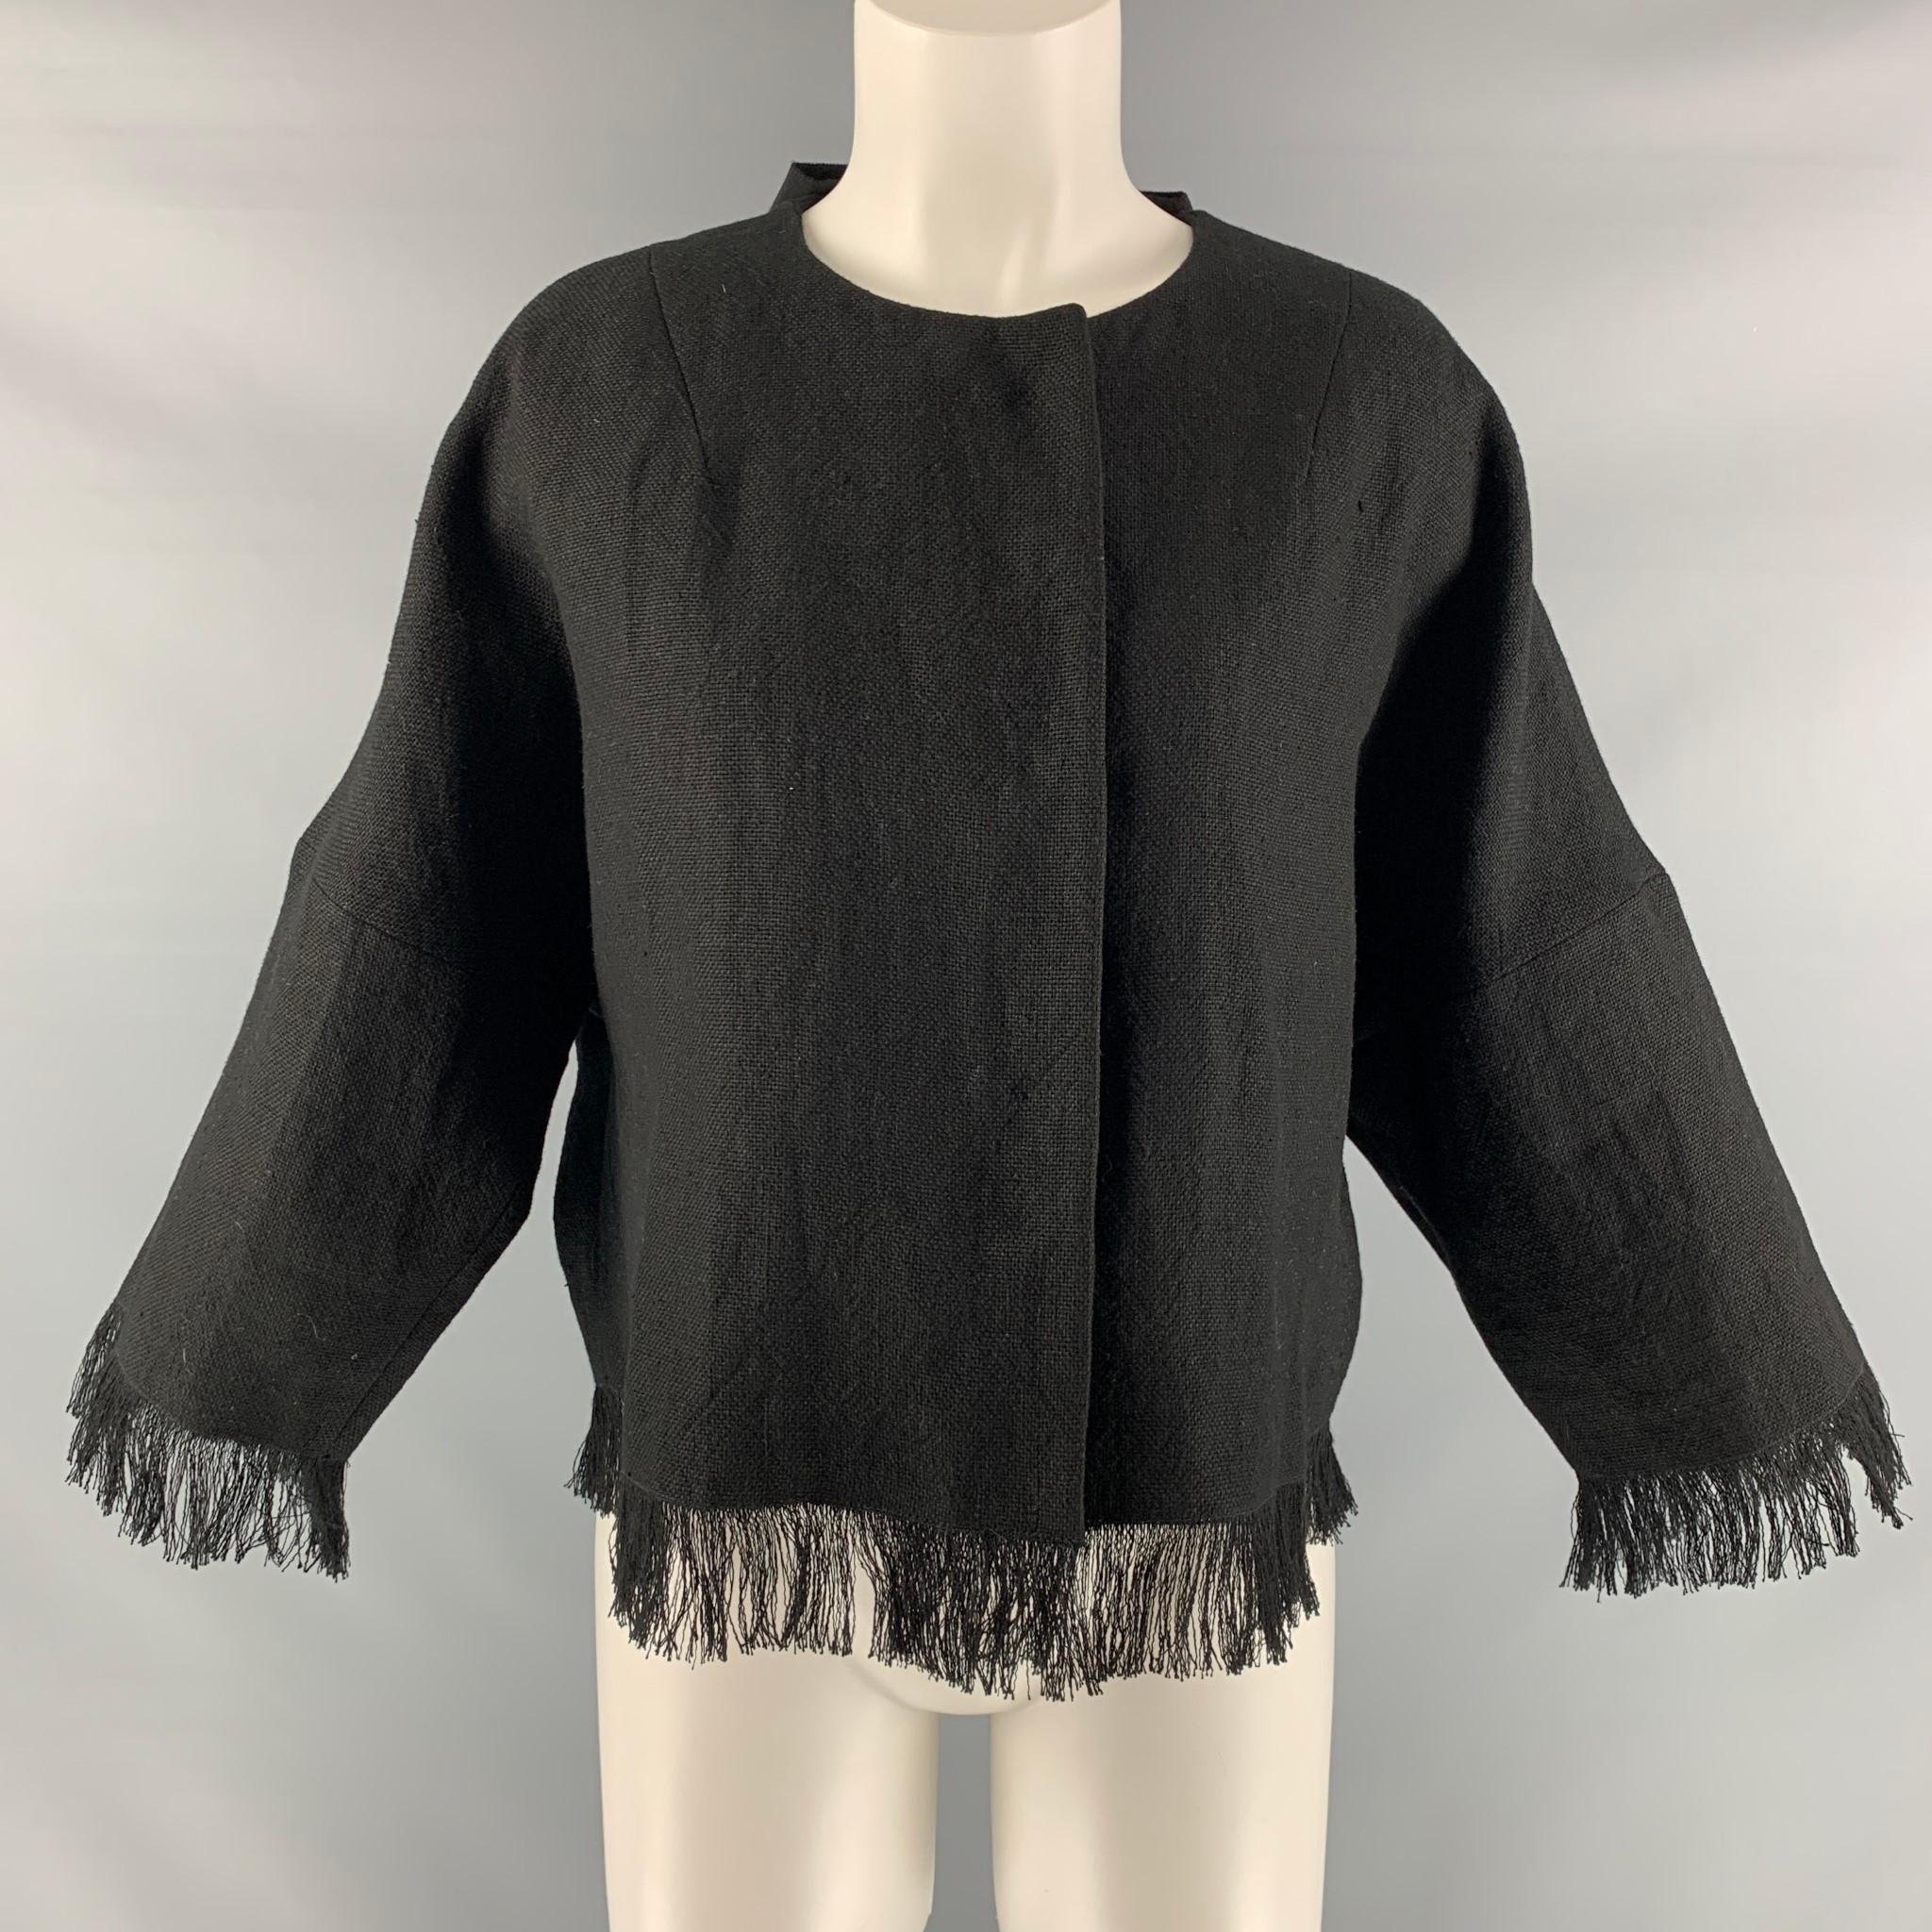 ANDREW GN oversized 3/4 sleeve jacket comes in black linen fabric featuring fringe hem detail, snap button closure and bow detail at center back. Made in France.

Excellent Pre-Owned Condition.
Marked: 36

Measurements:

Shoulder: 17 in.
Bust: 44